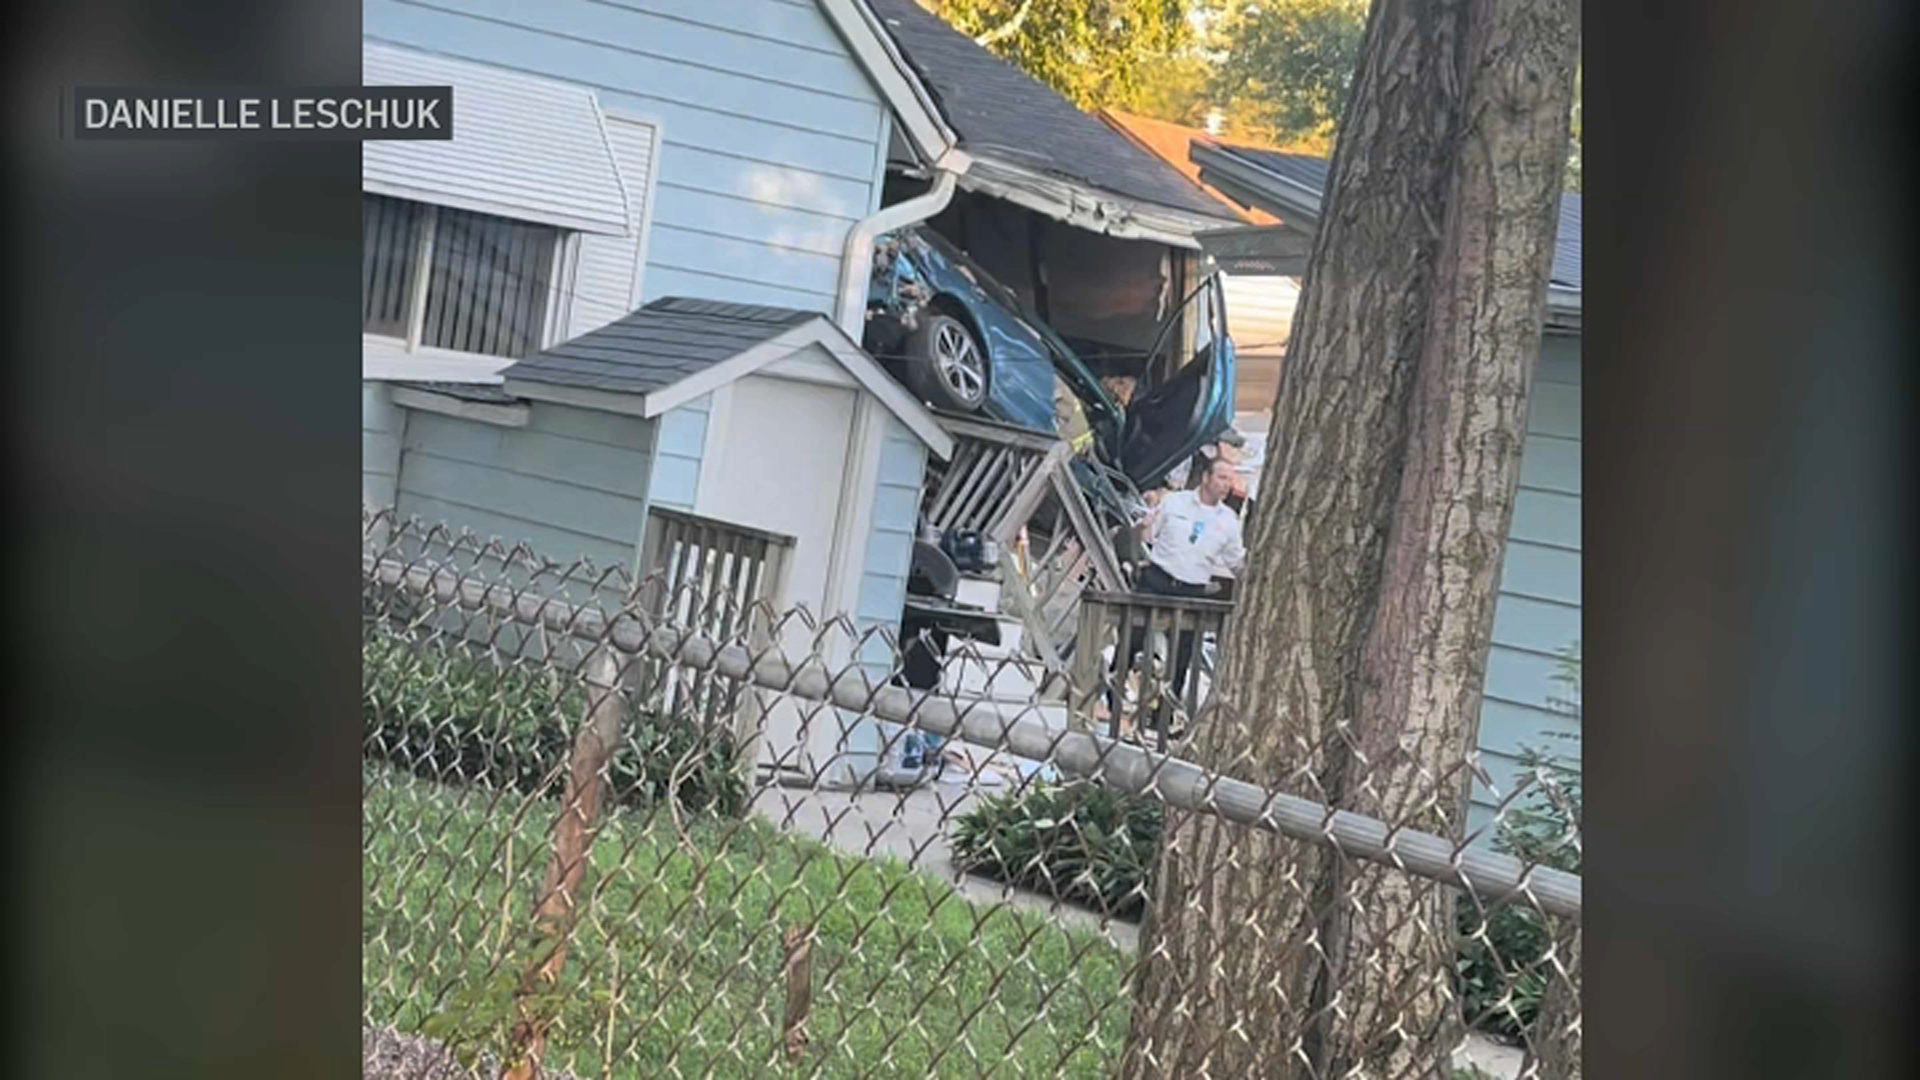 Medical Helicopter Called After Car Crashes Into Home in Crystal Lake – NBC Chicago